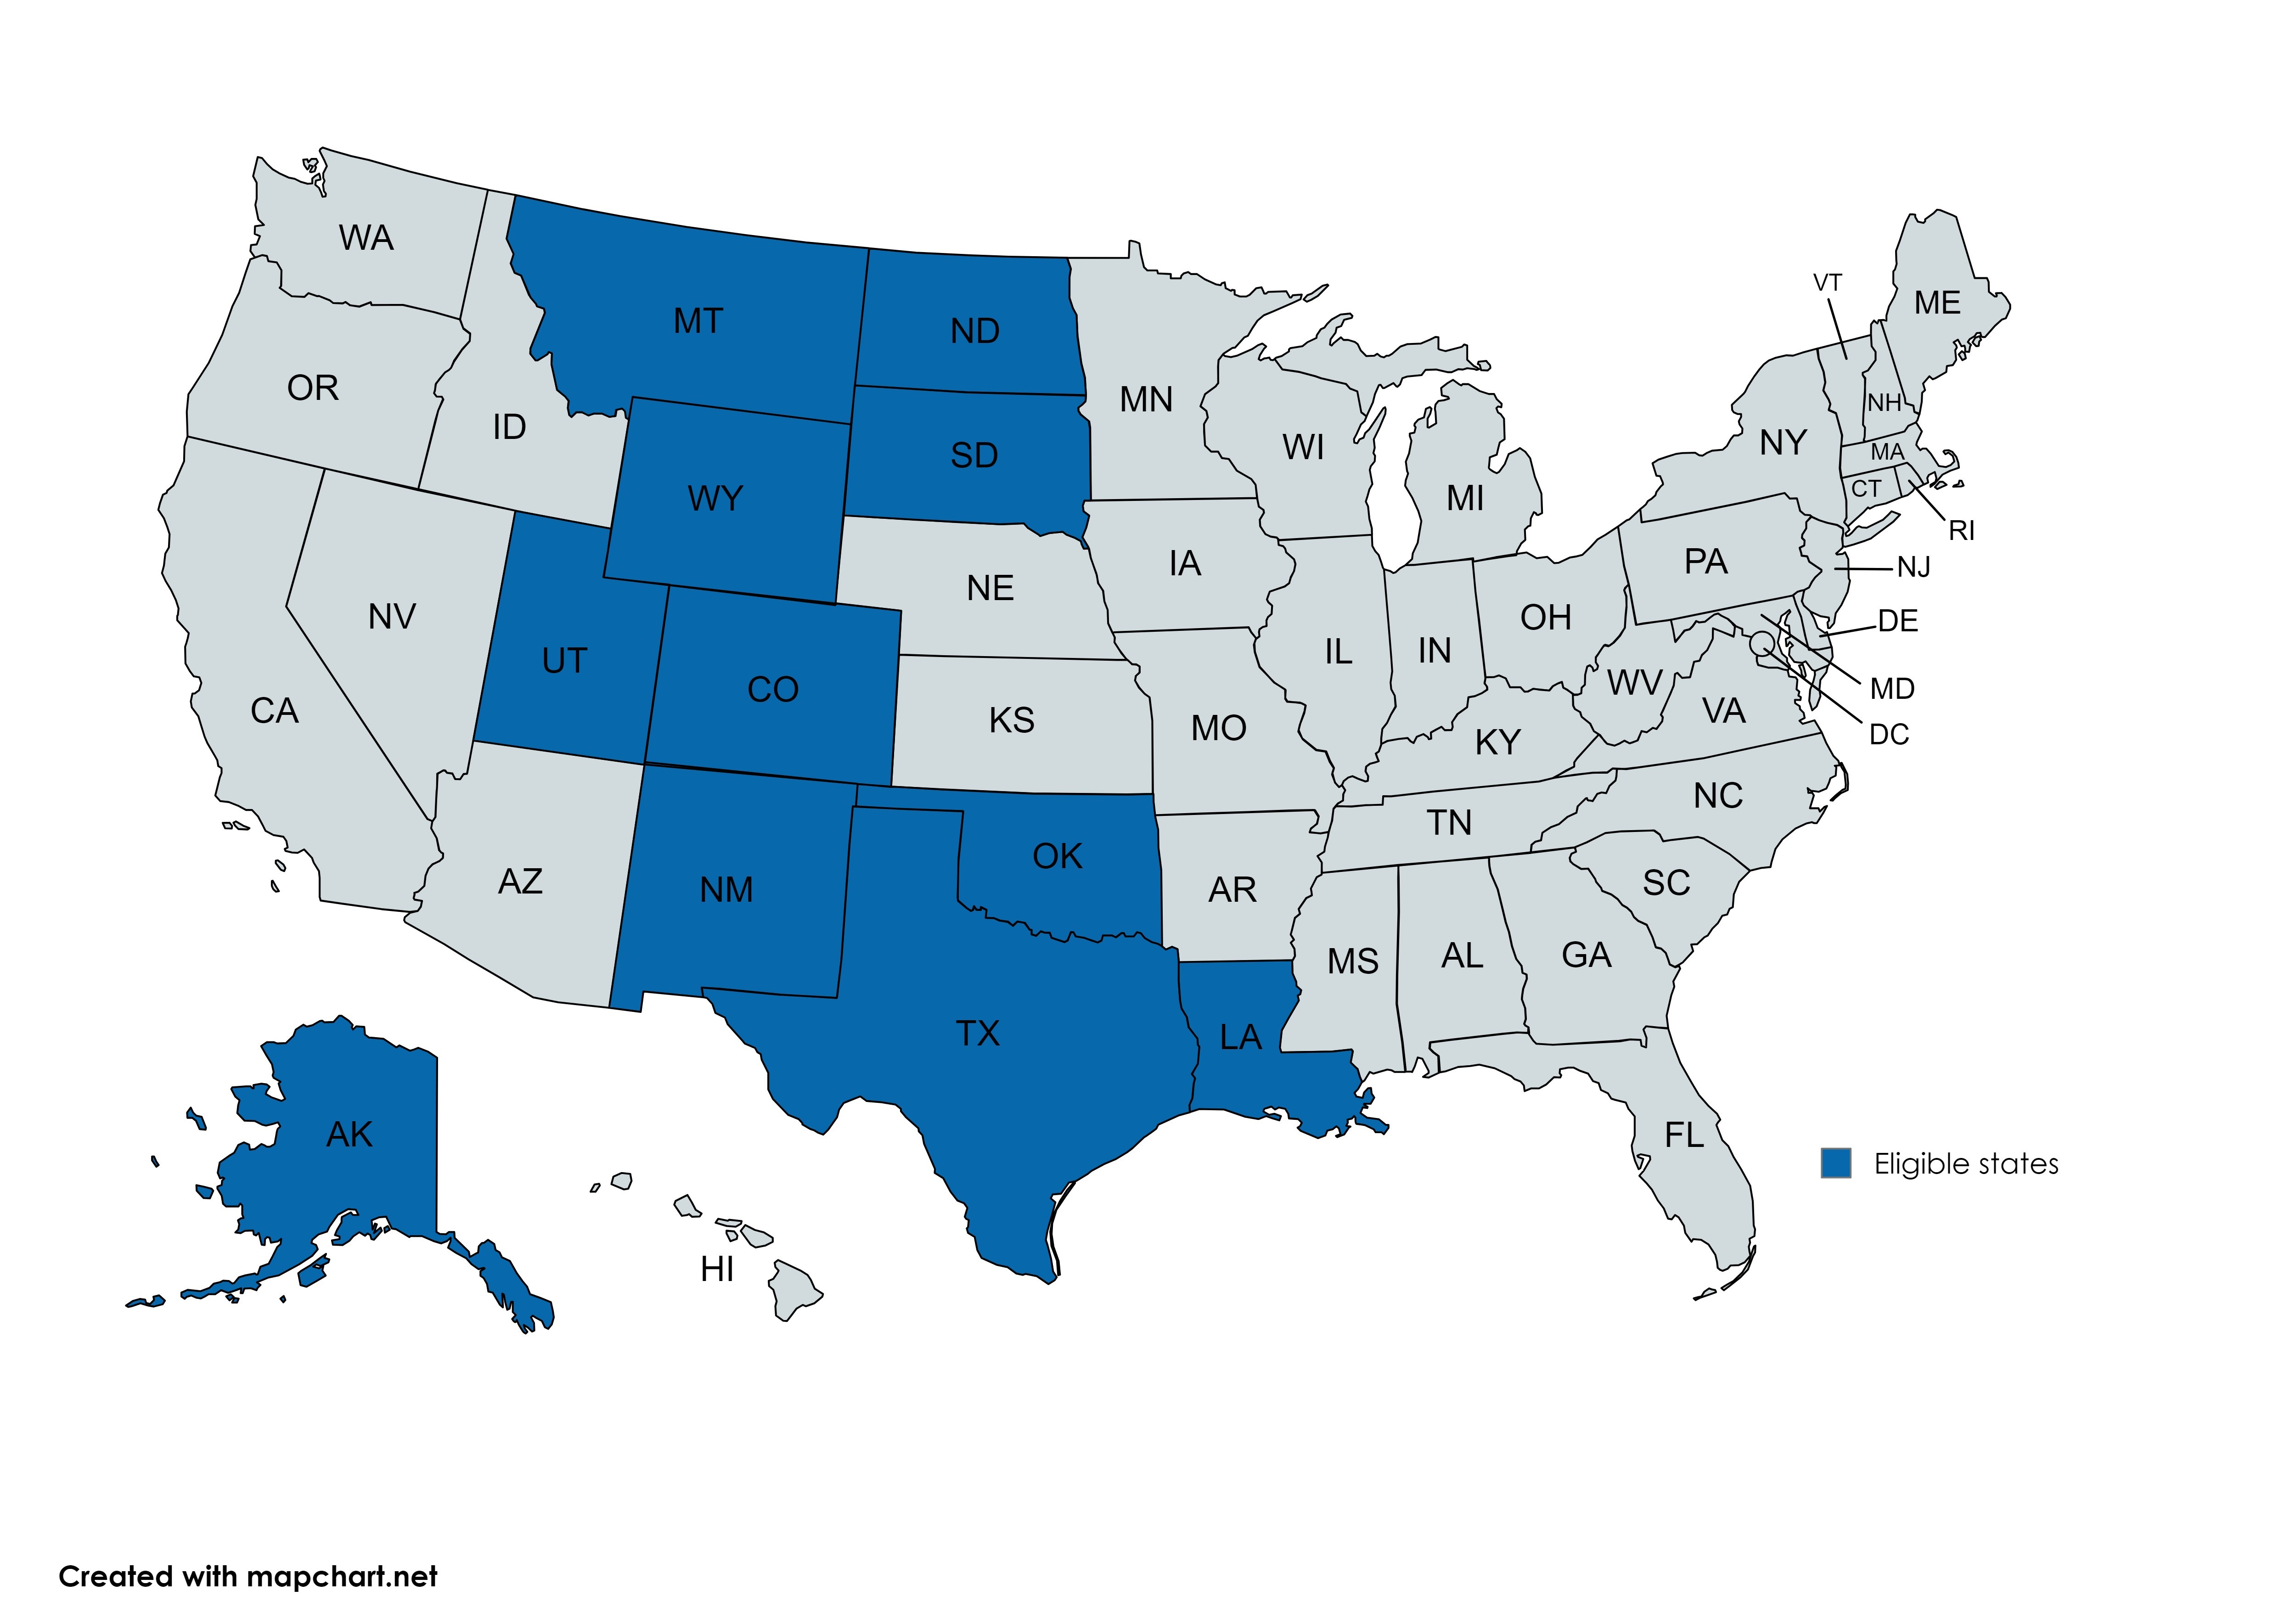 Map of the United States with eligible states highlighted in blue: MT, WY, UT, CO, NM AK, ND, SD, OK, TX, and LA.